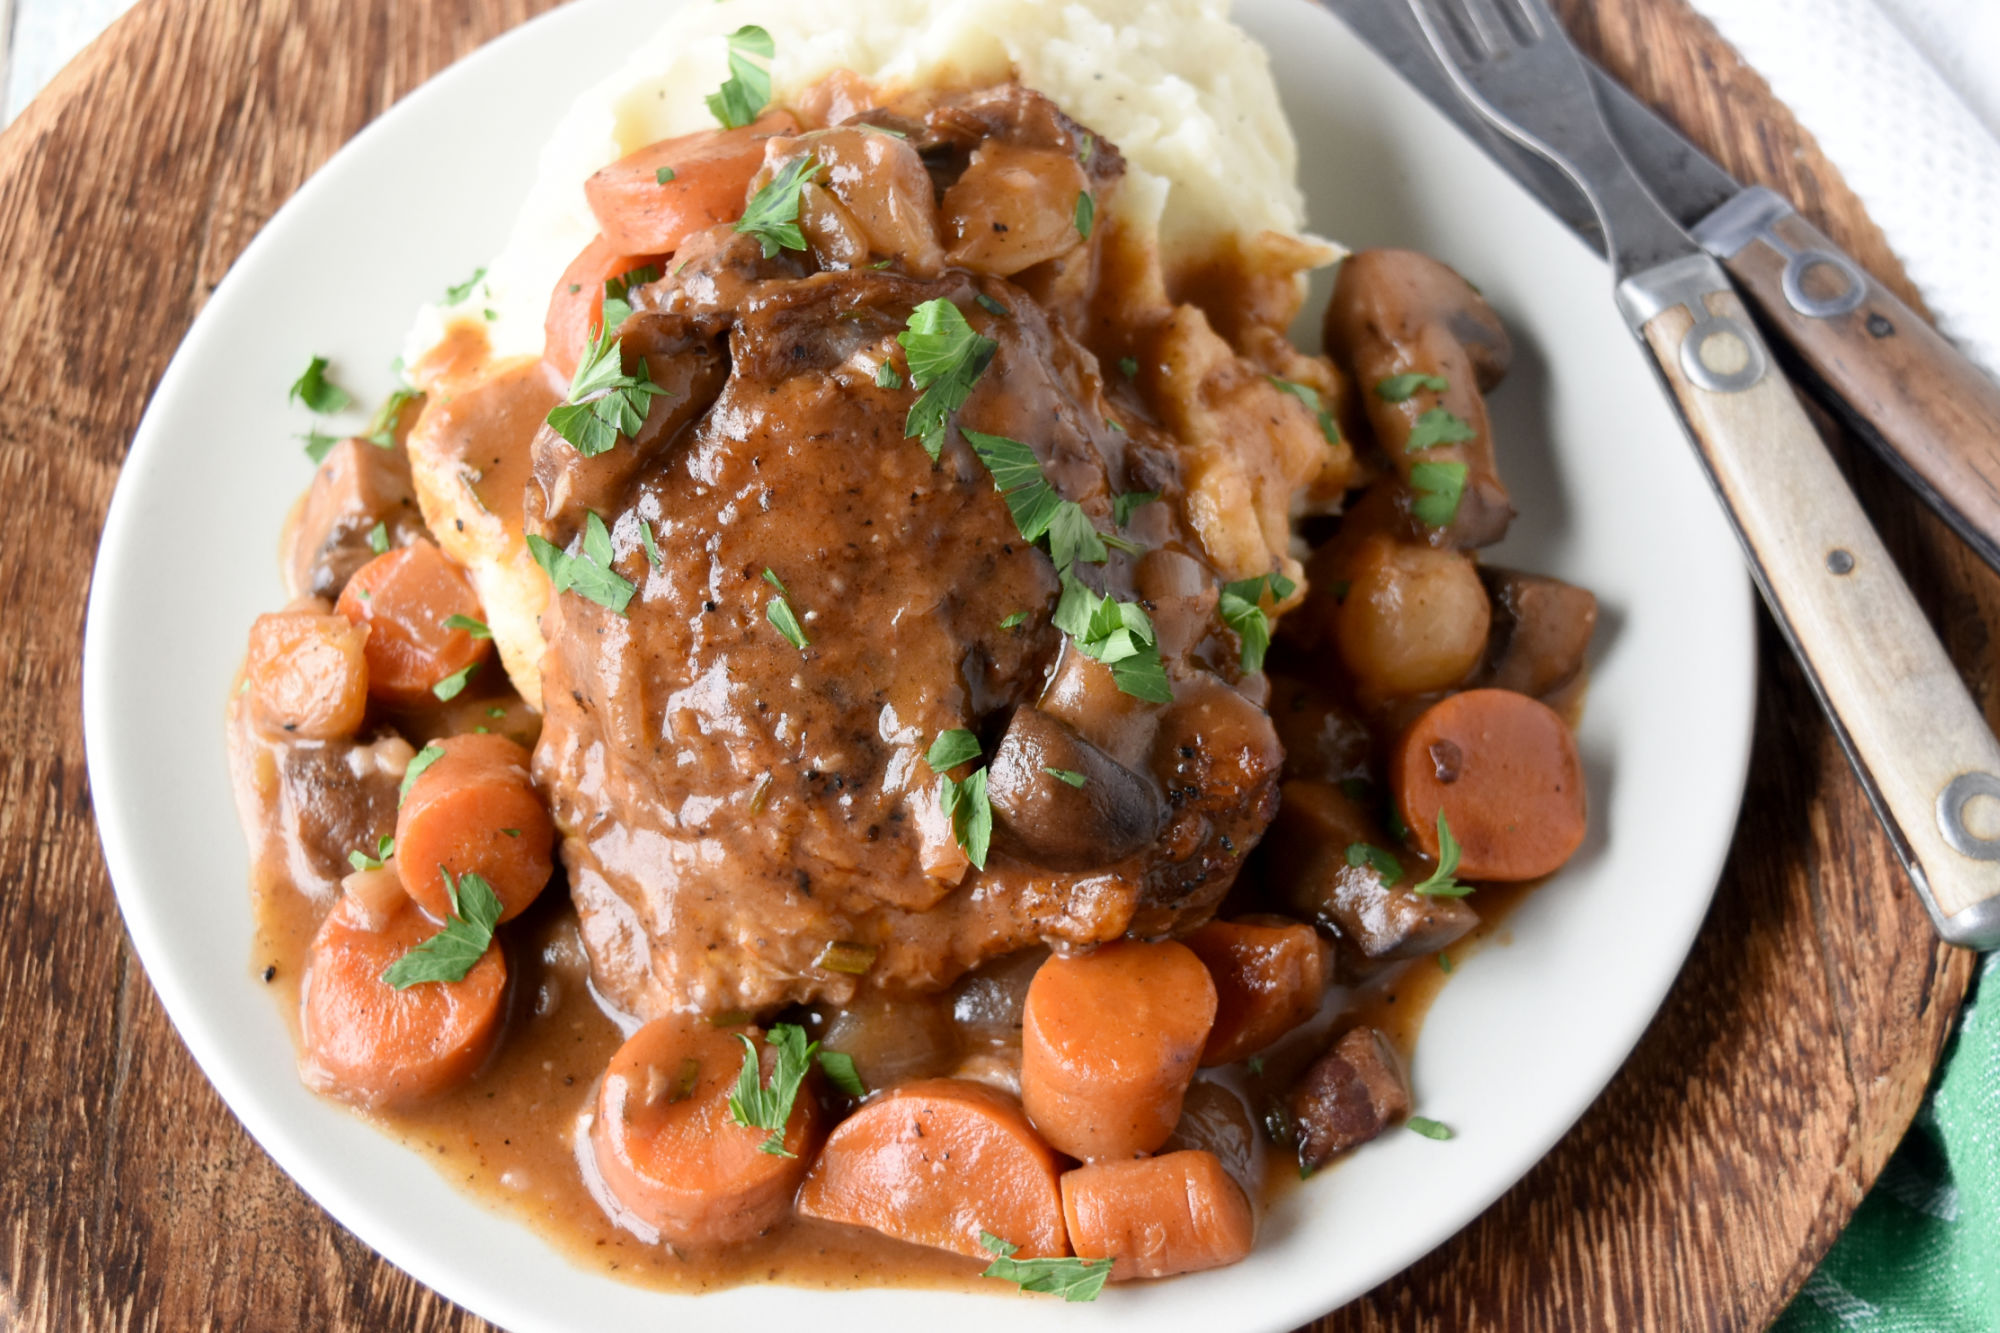 Classic Coq au Vin has all the French flavors – A Kitchen Hoor's Adventures